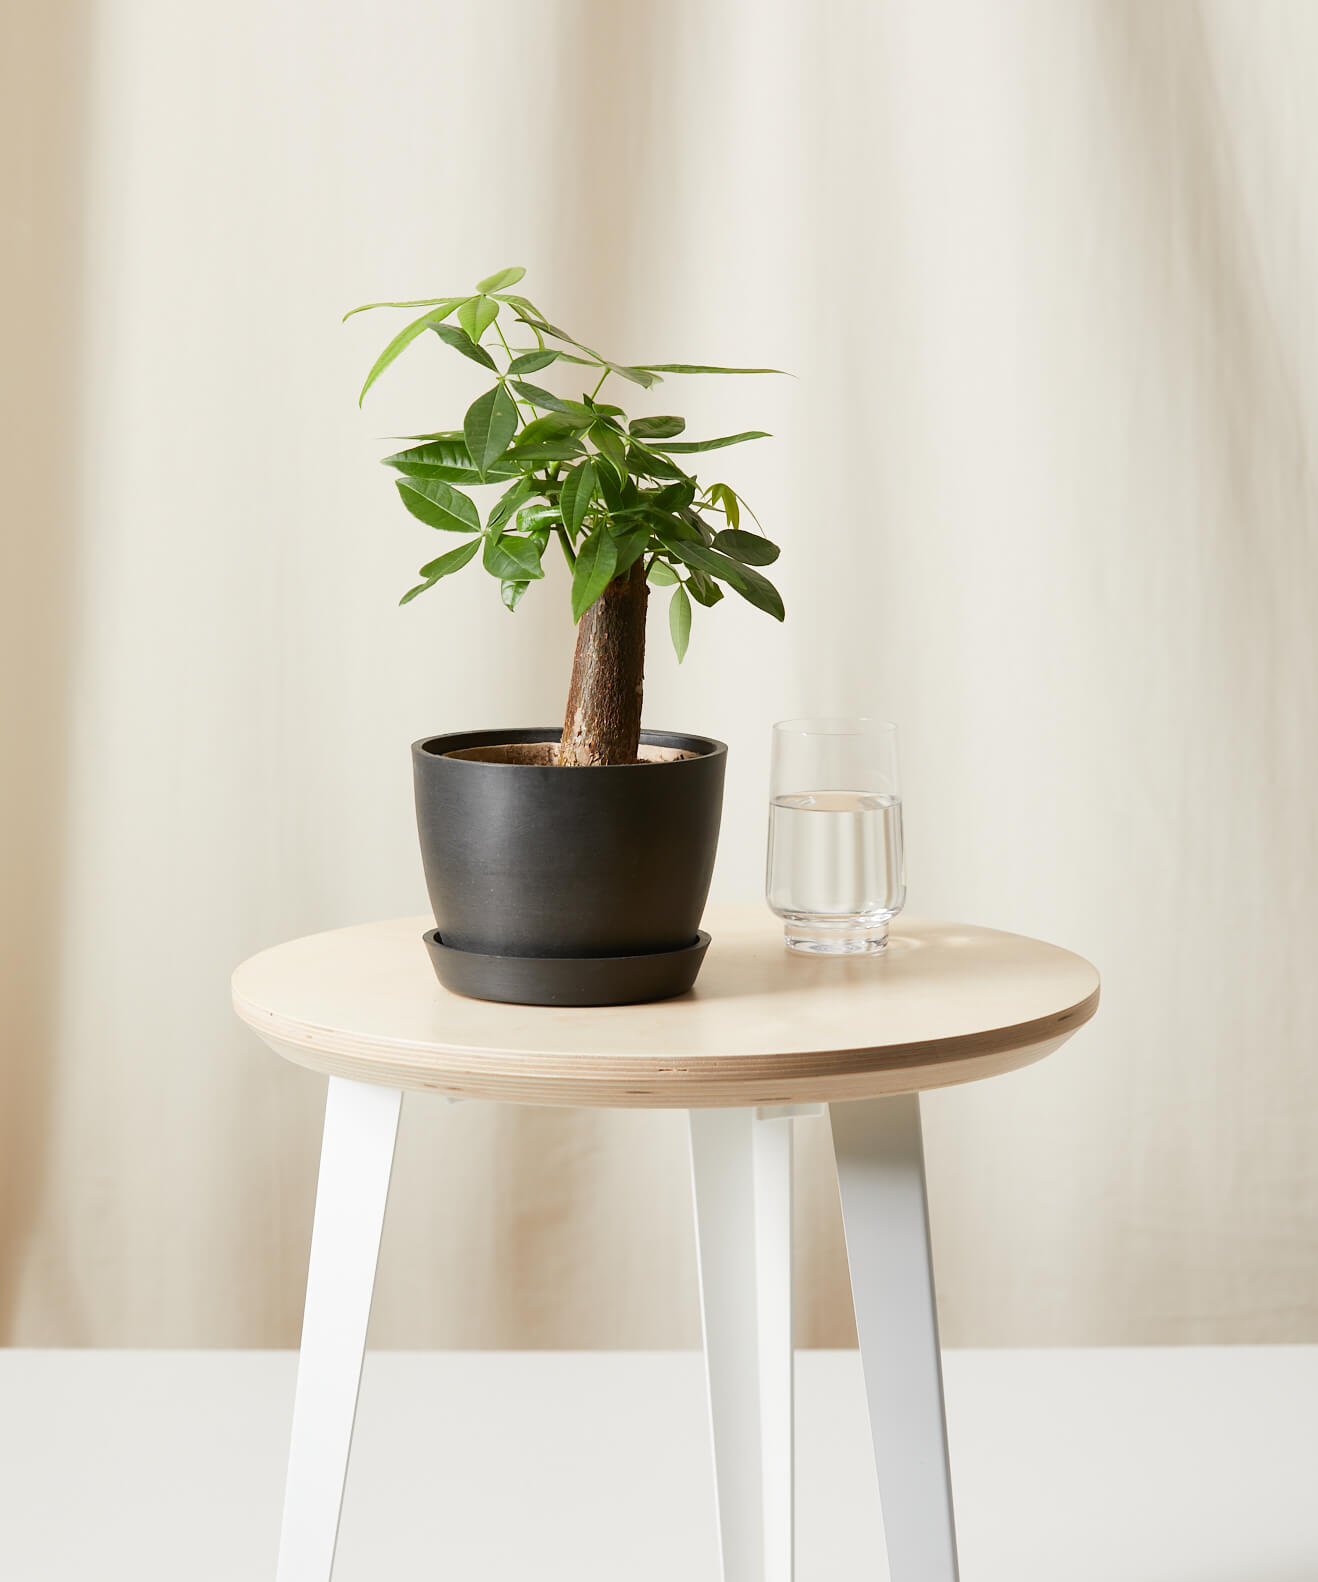 So You Want To Be A Plant Mom: 11 Things To Know Before Buying Your First Houseplant Baby